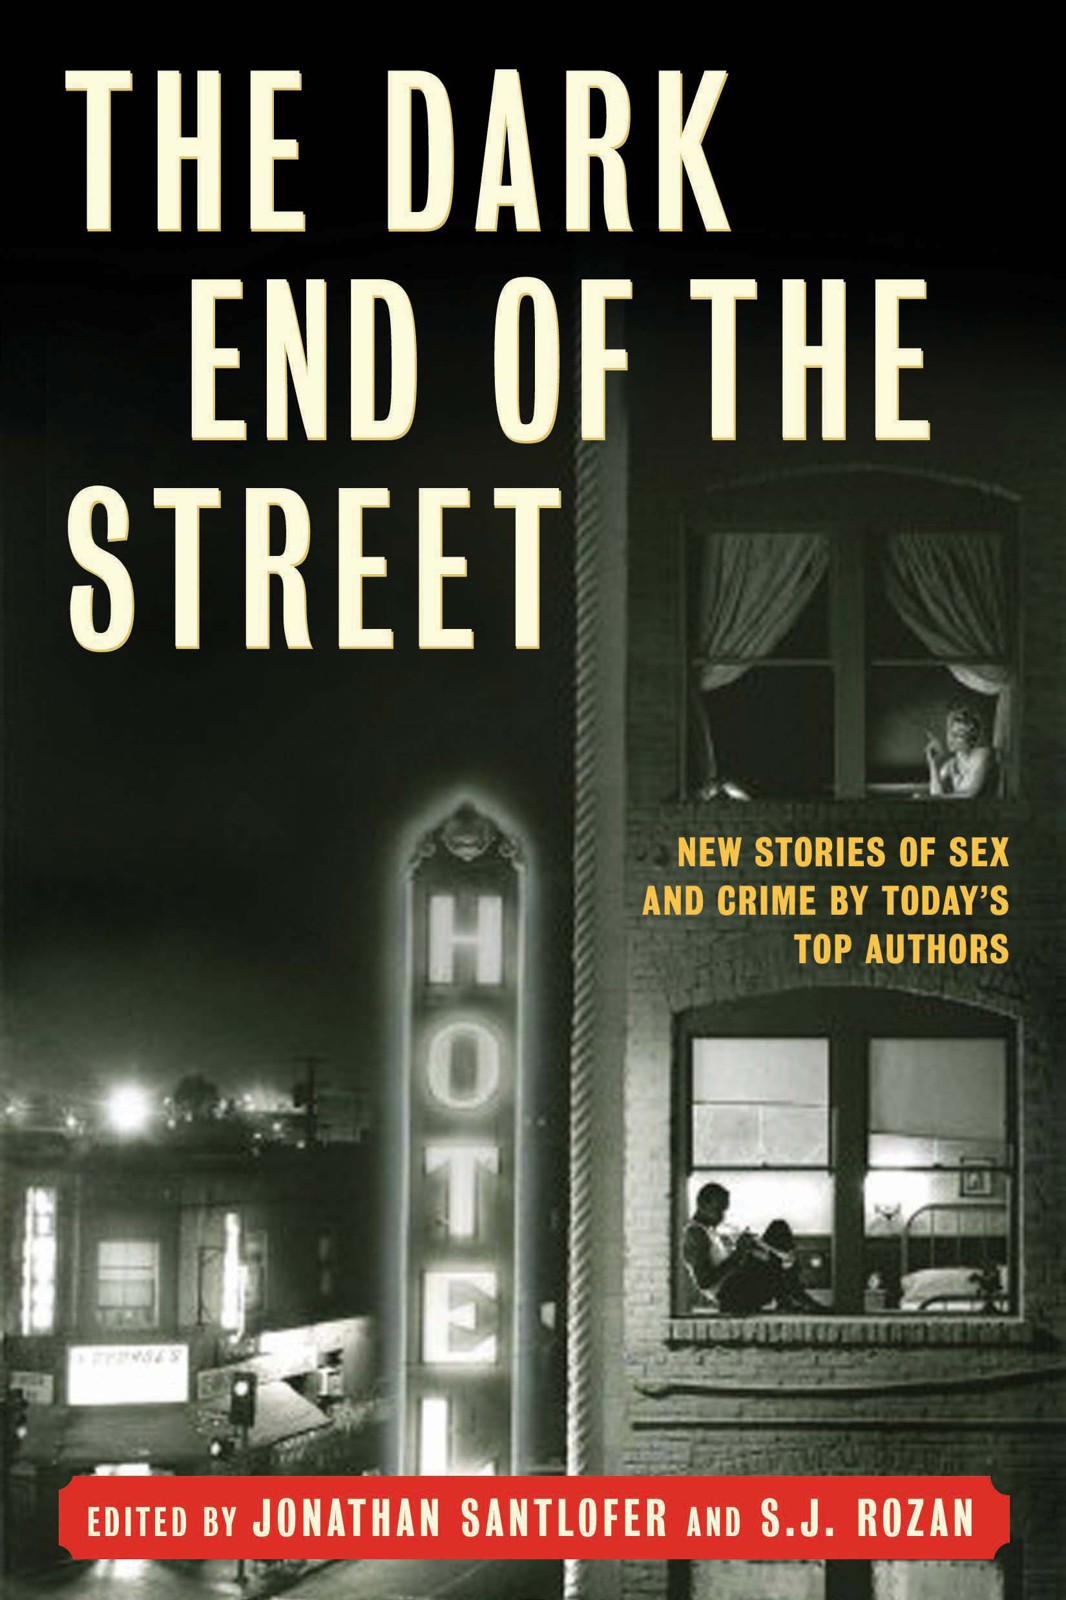 The Dark End of the Street: New Stories of Sex and Crime by Today's Top Authors by Jonathan Santlofer